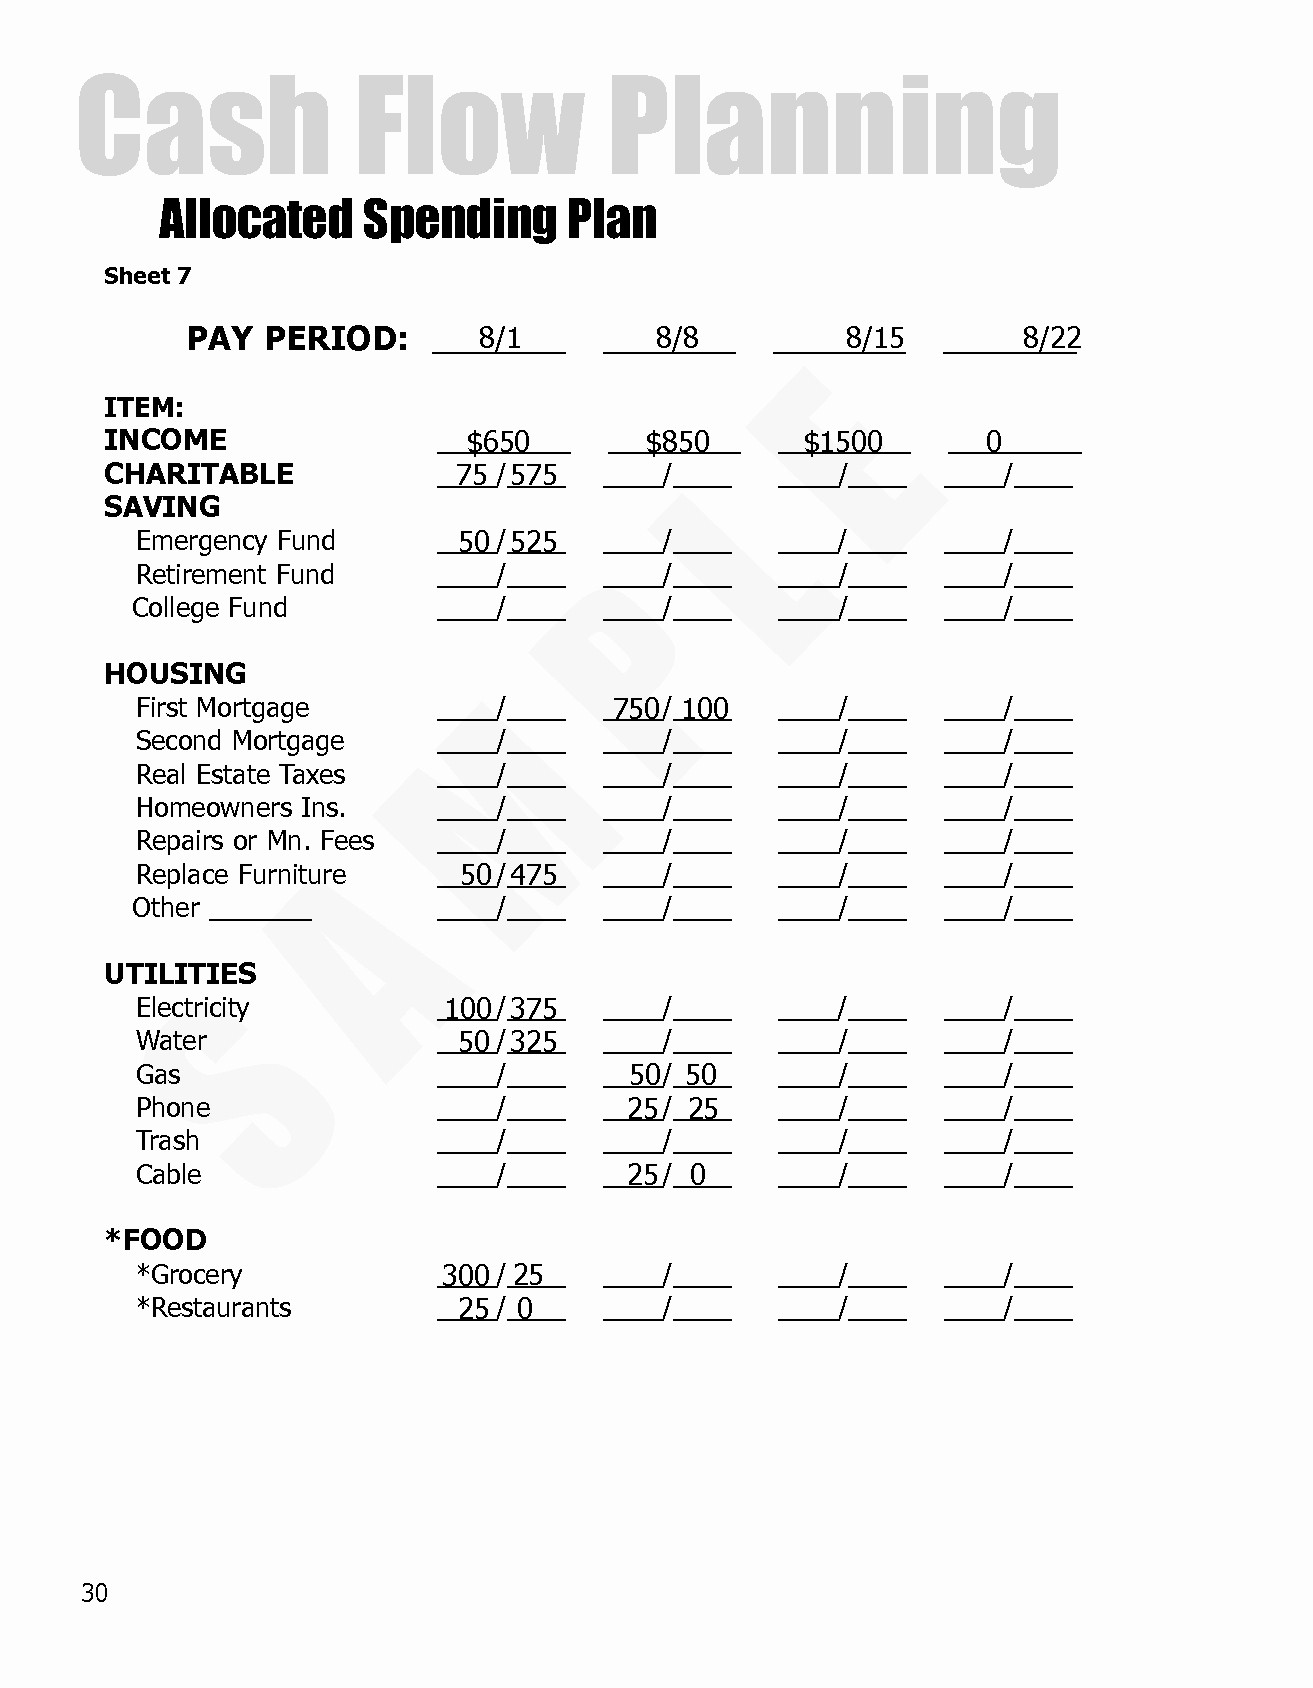 Dave Ramsey Allocated Spending Plan Excel Spreadsheet New How To Use Document